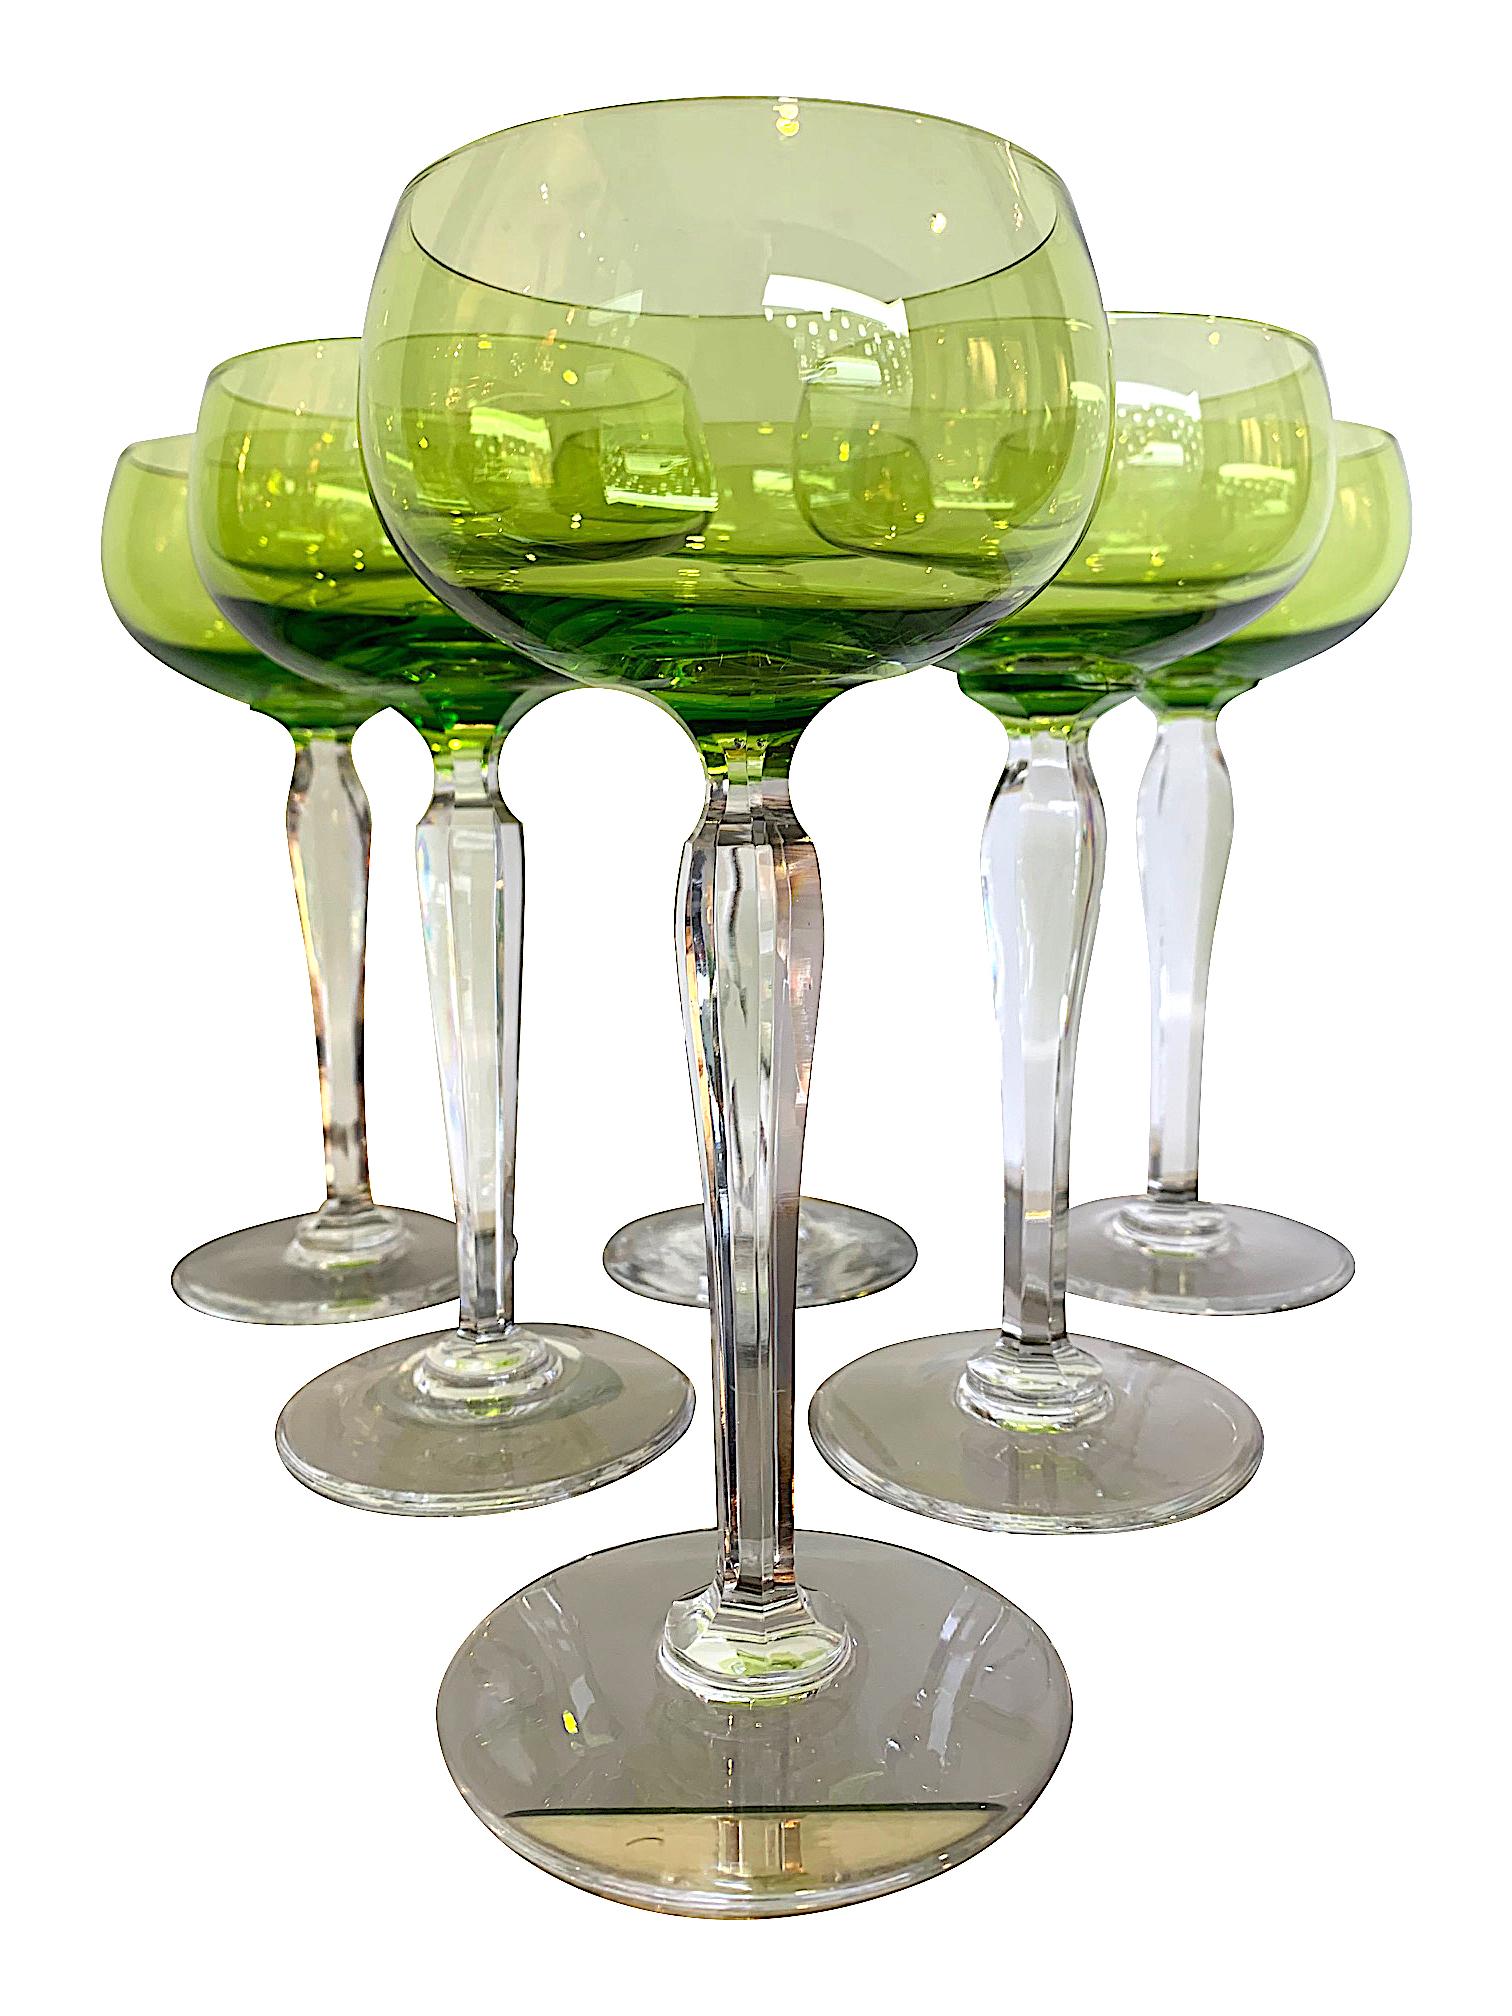 A set of six Val Saint Lambert green crystal hock glasses with cut faceted crystal stems. These are very elegant tall glasses and could be used for Champagne or cocktails. 

 “Hock” is an old-time word for German white wine, but you can use this